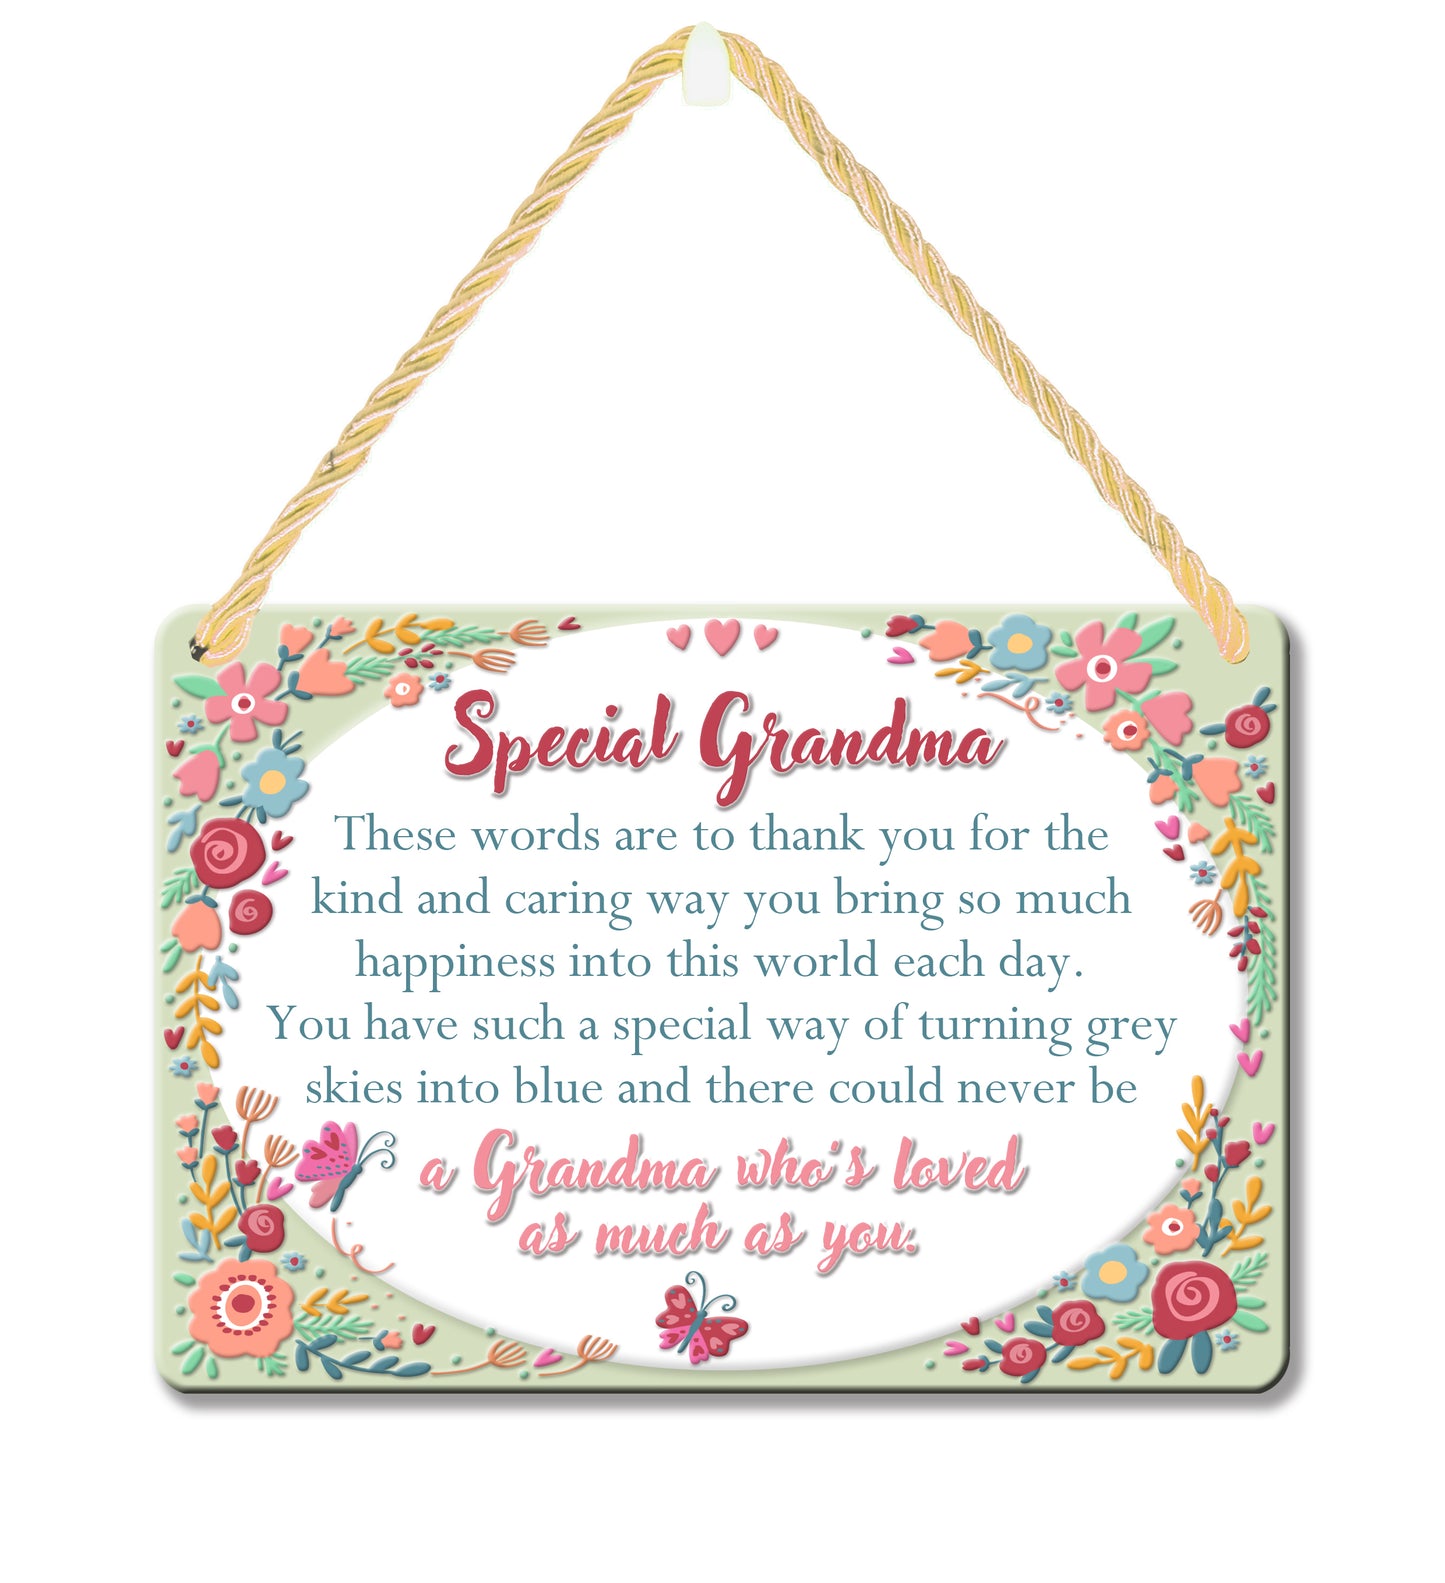 Special Grandma Who's Loved As Much As You Tin Hanging Plaque